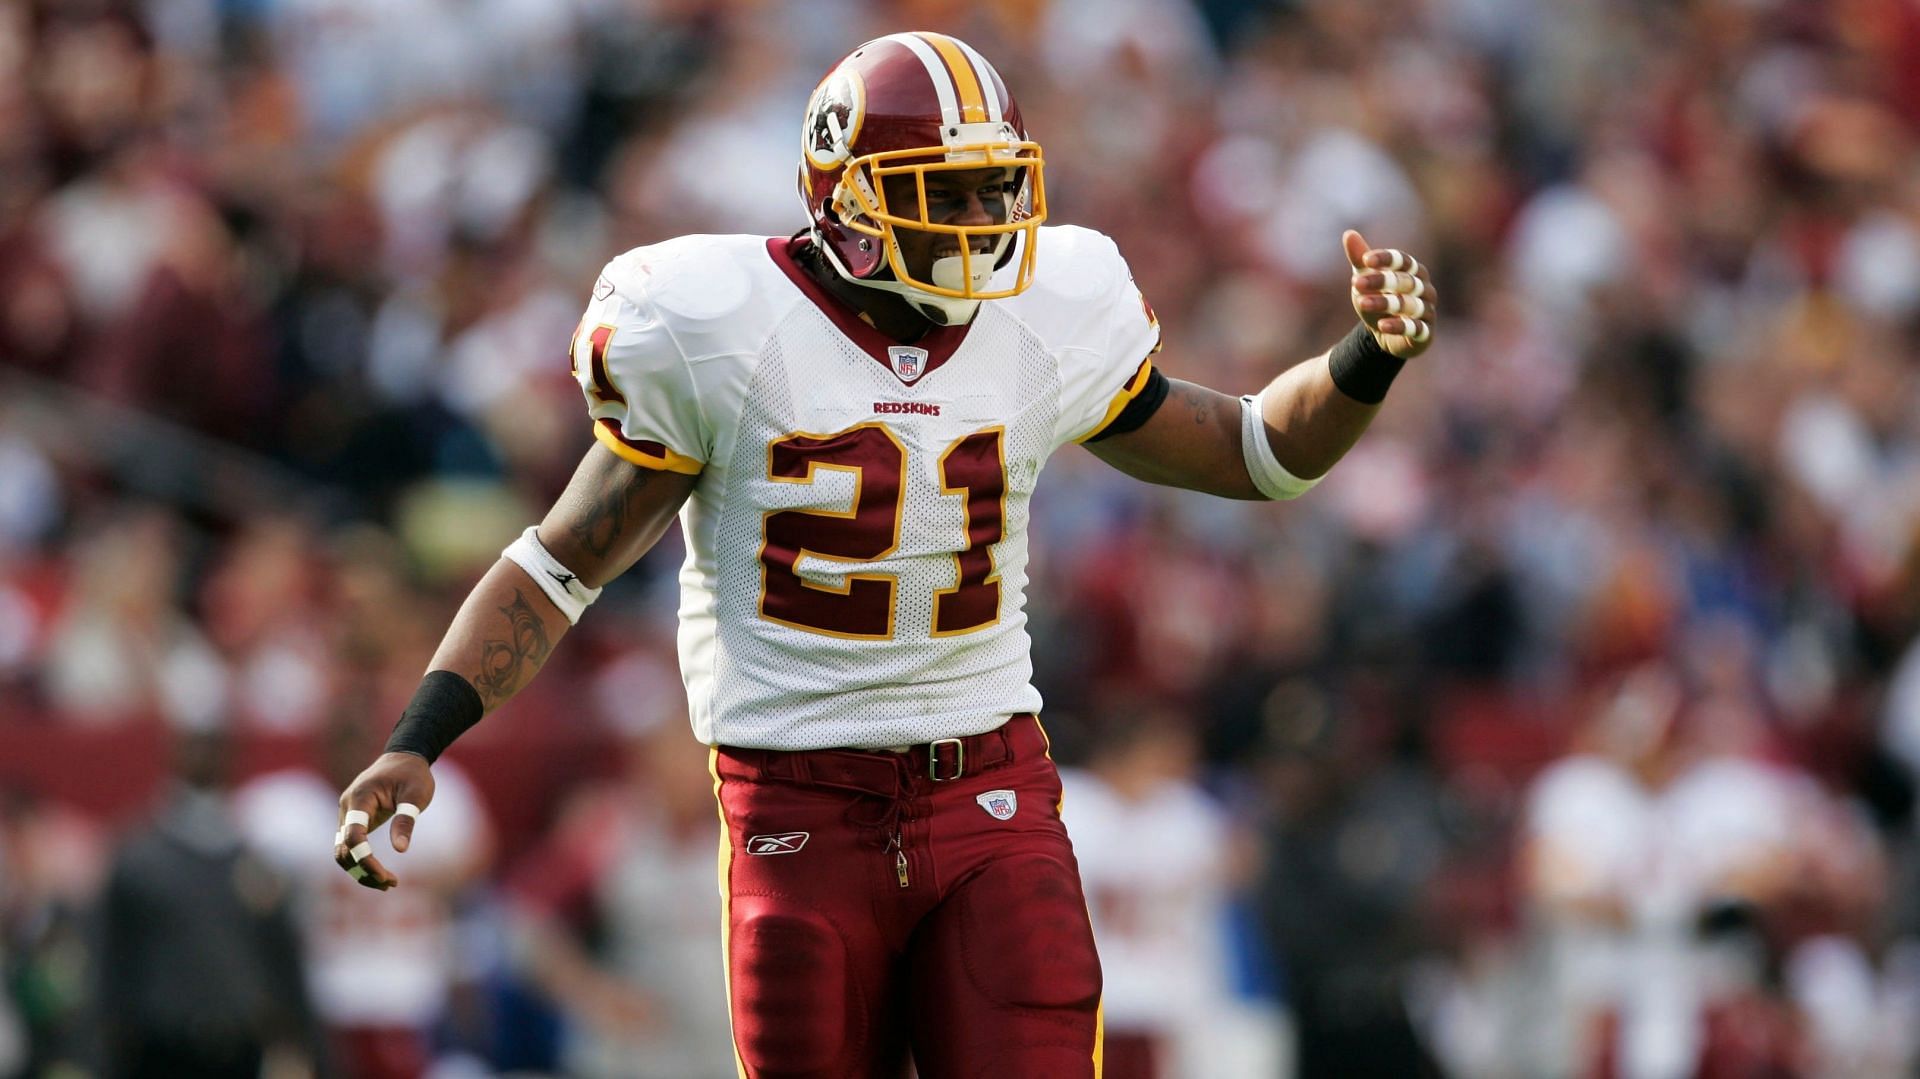 Sean Taylor was murdered in his home in the middle of an All-Pro season